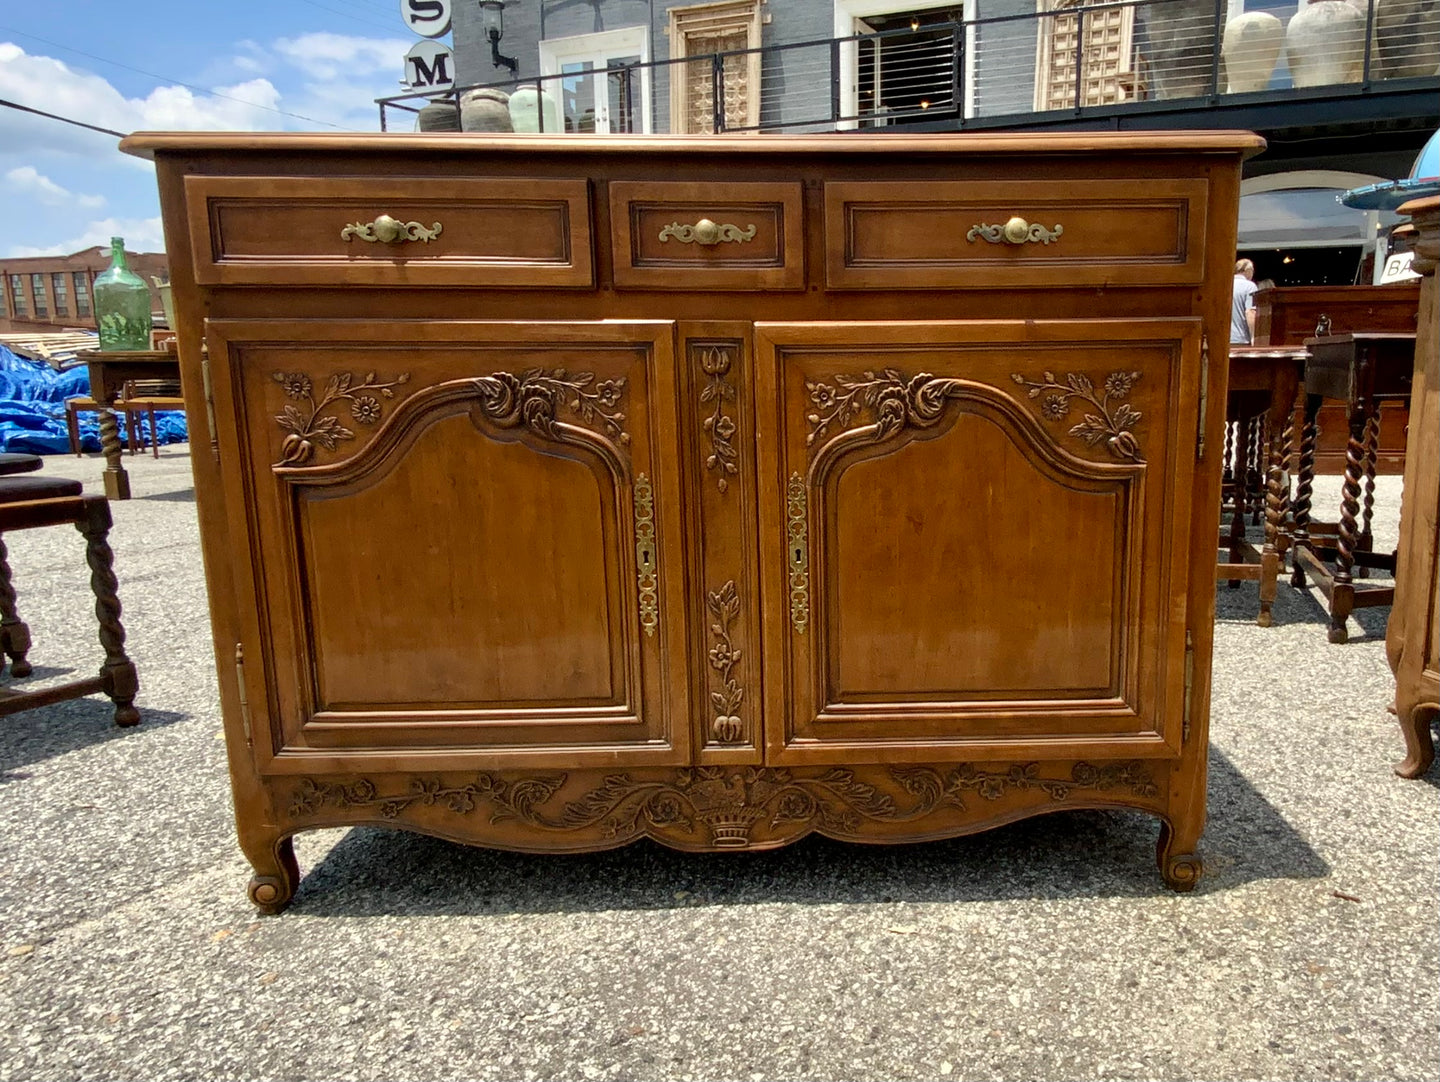 Decorative French Buffet Fruitwood Carved Bureau